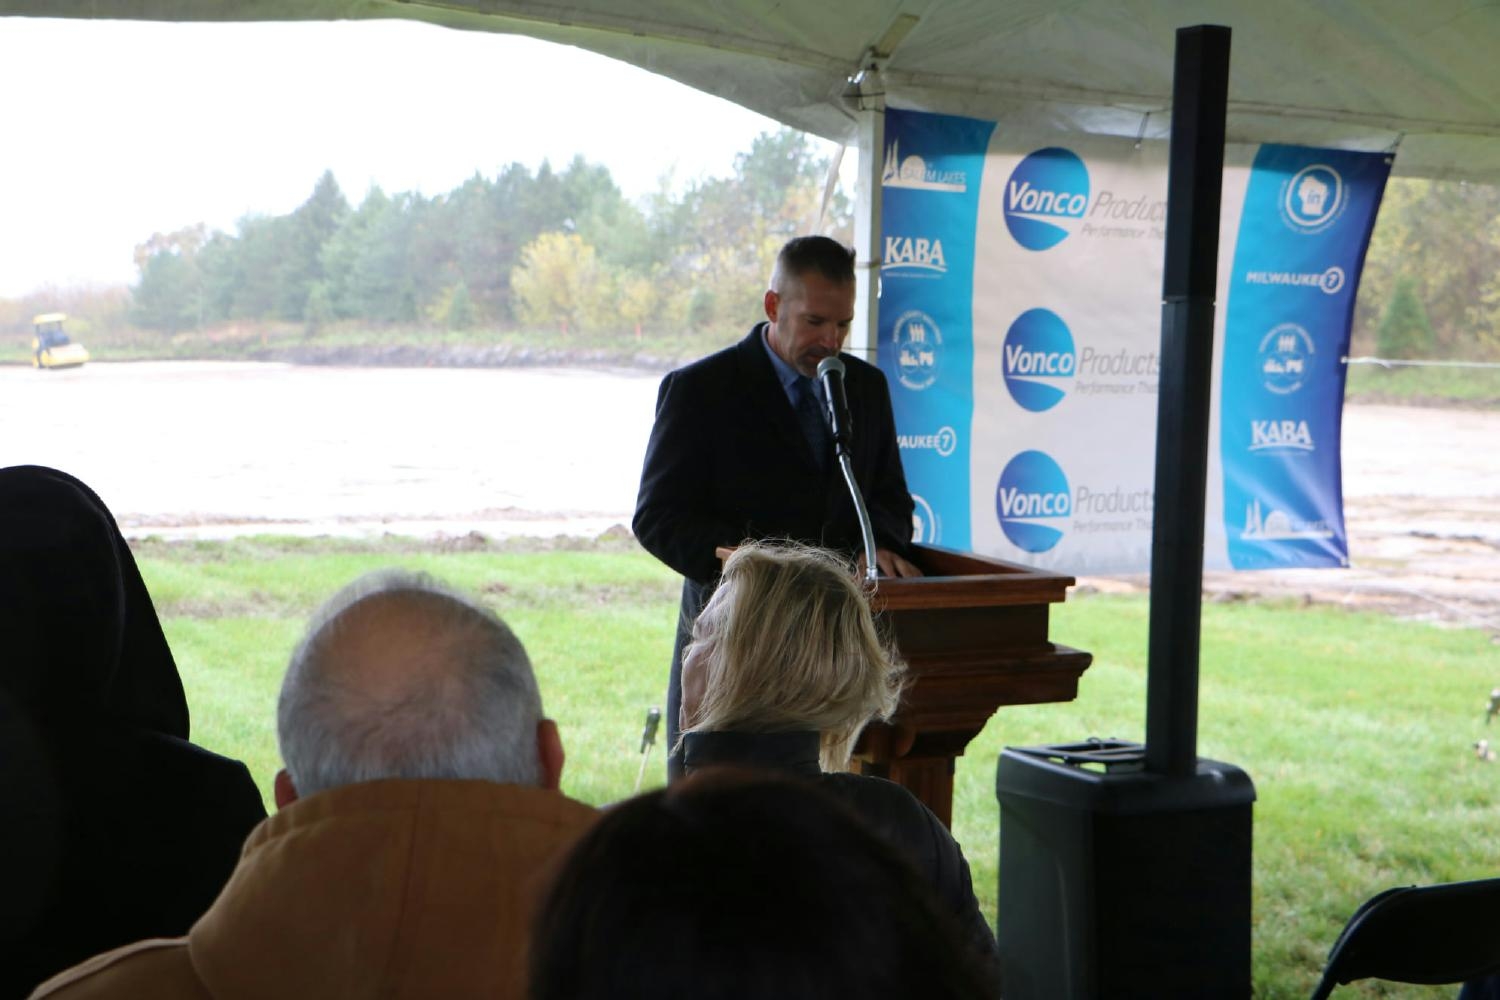 Keith Smith, President of Vonco speaking at our groundbreaking for our expansion